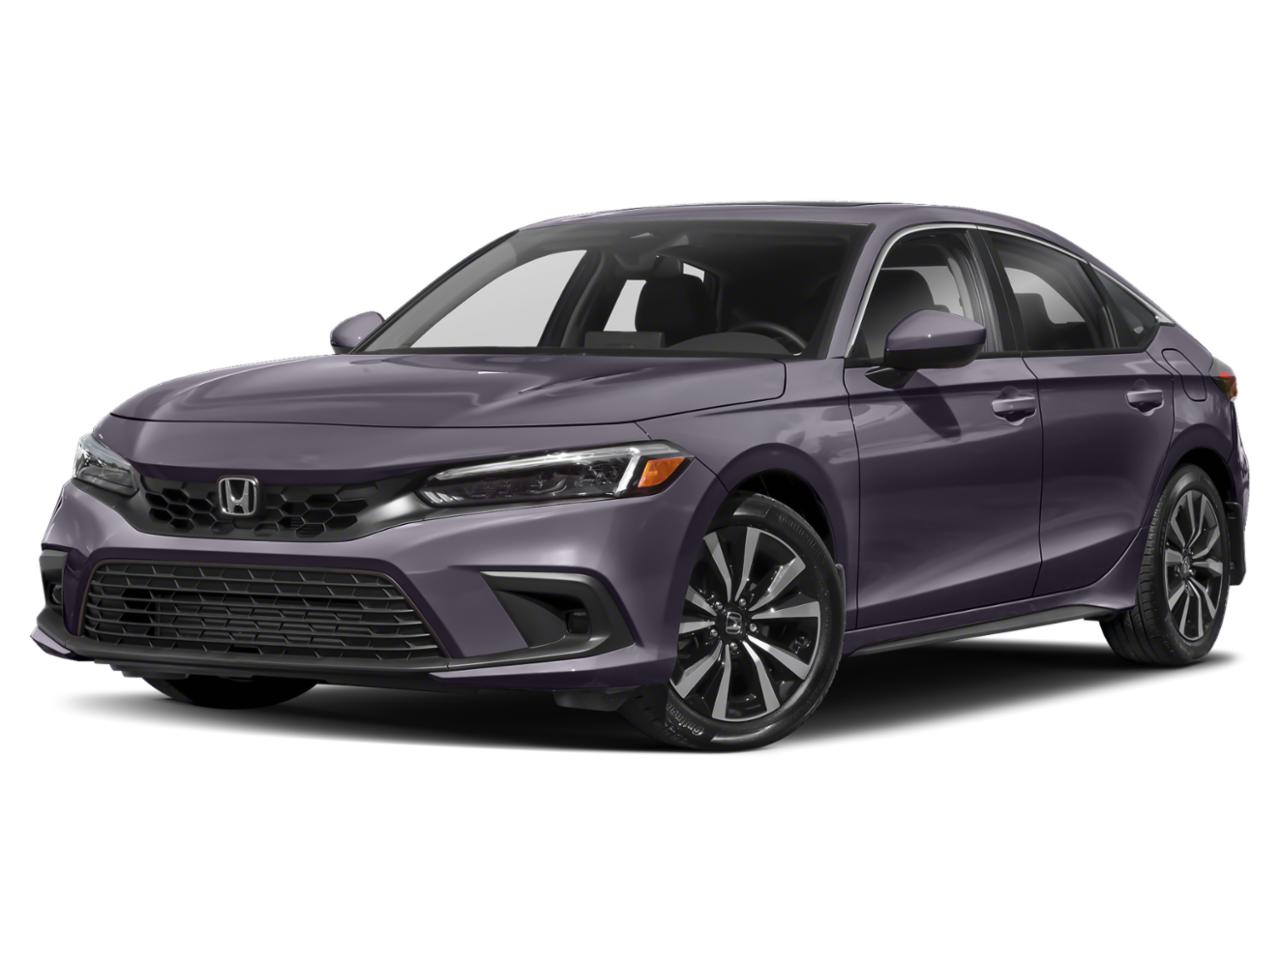 Wittmeier Honda is a Chico Honda dealer and a new car and used car